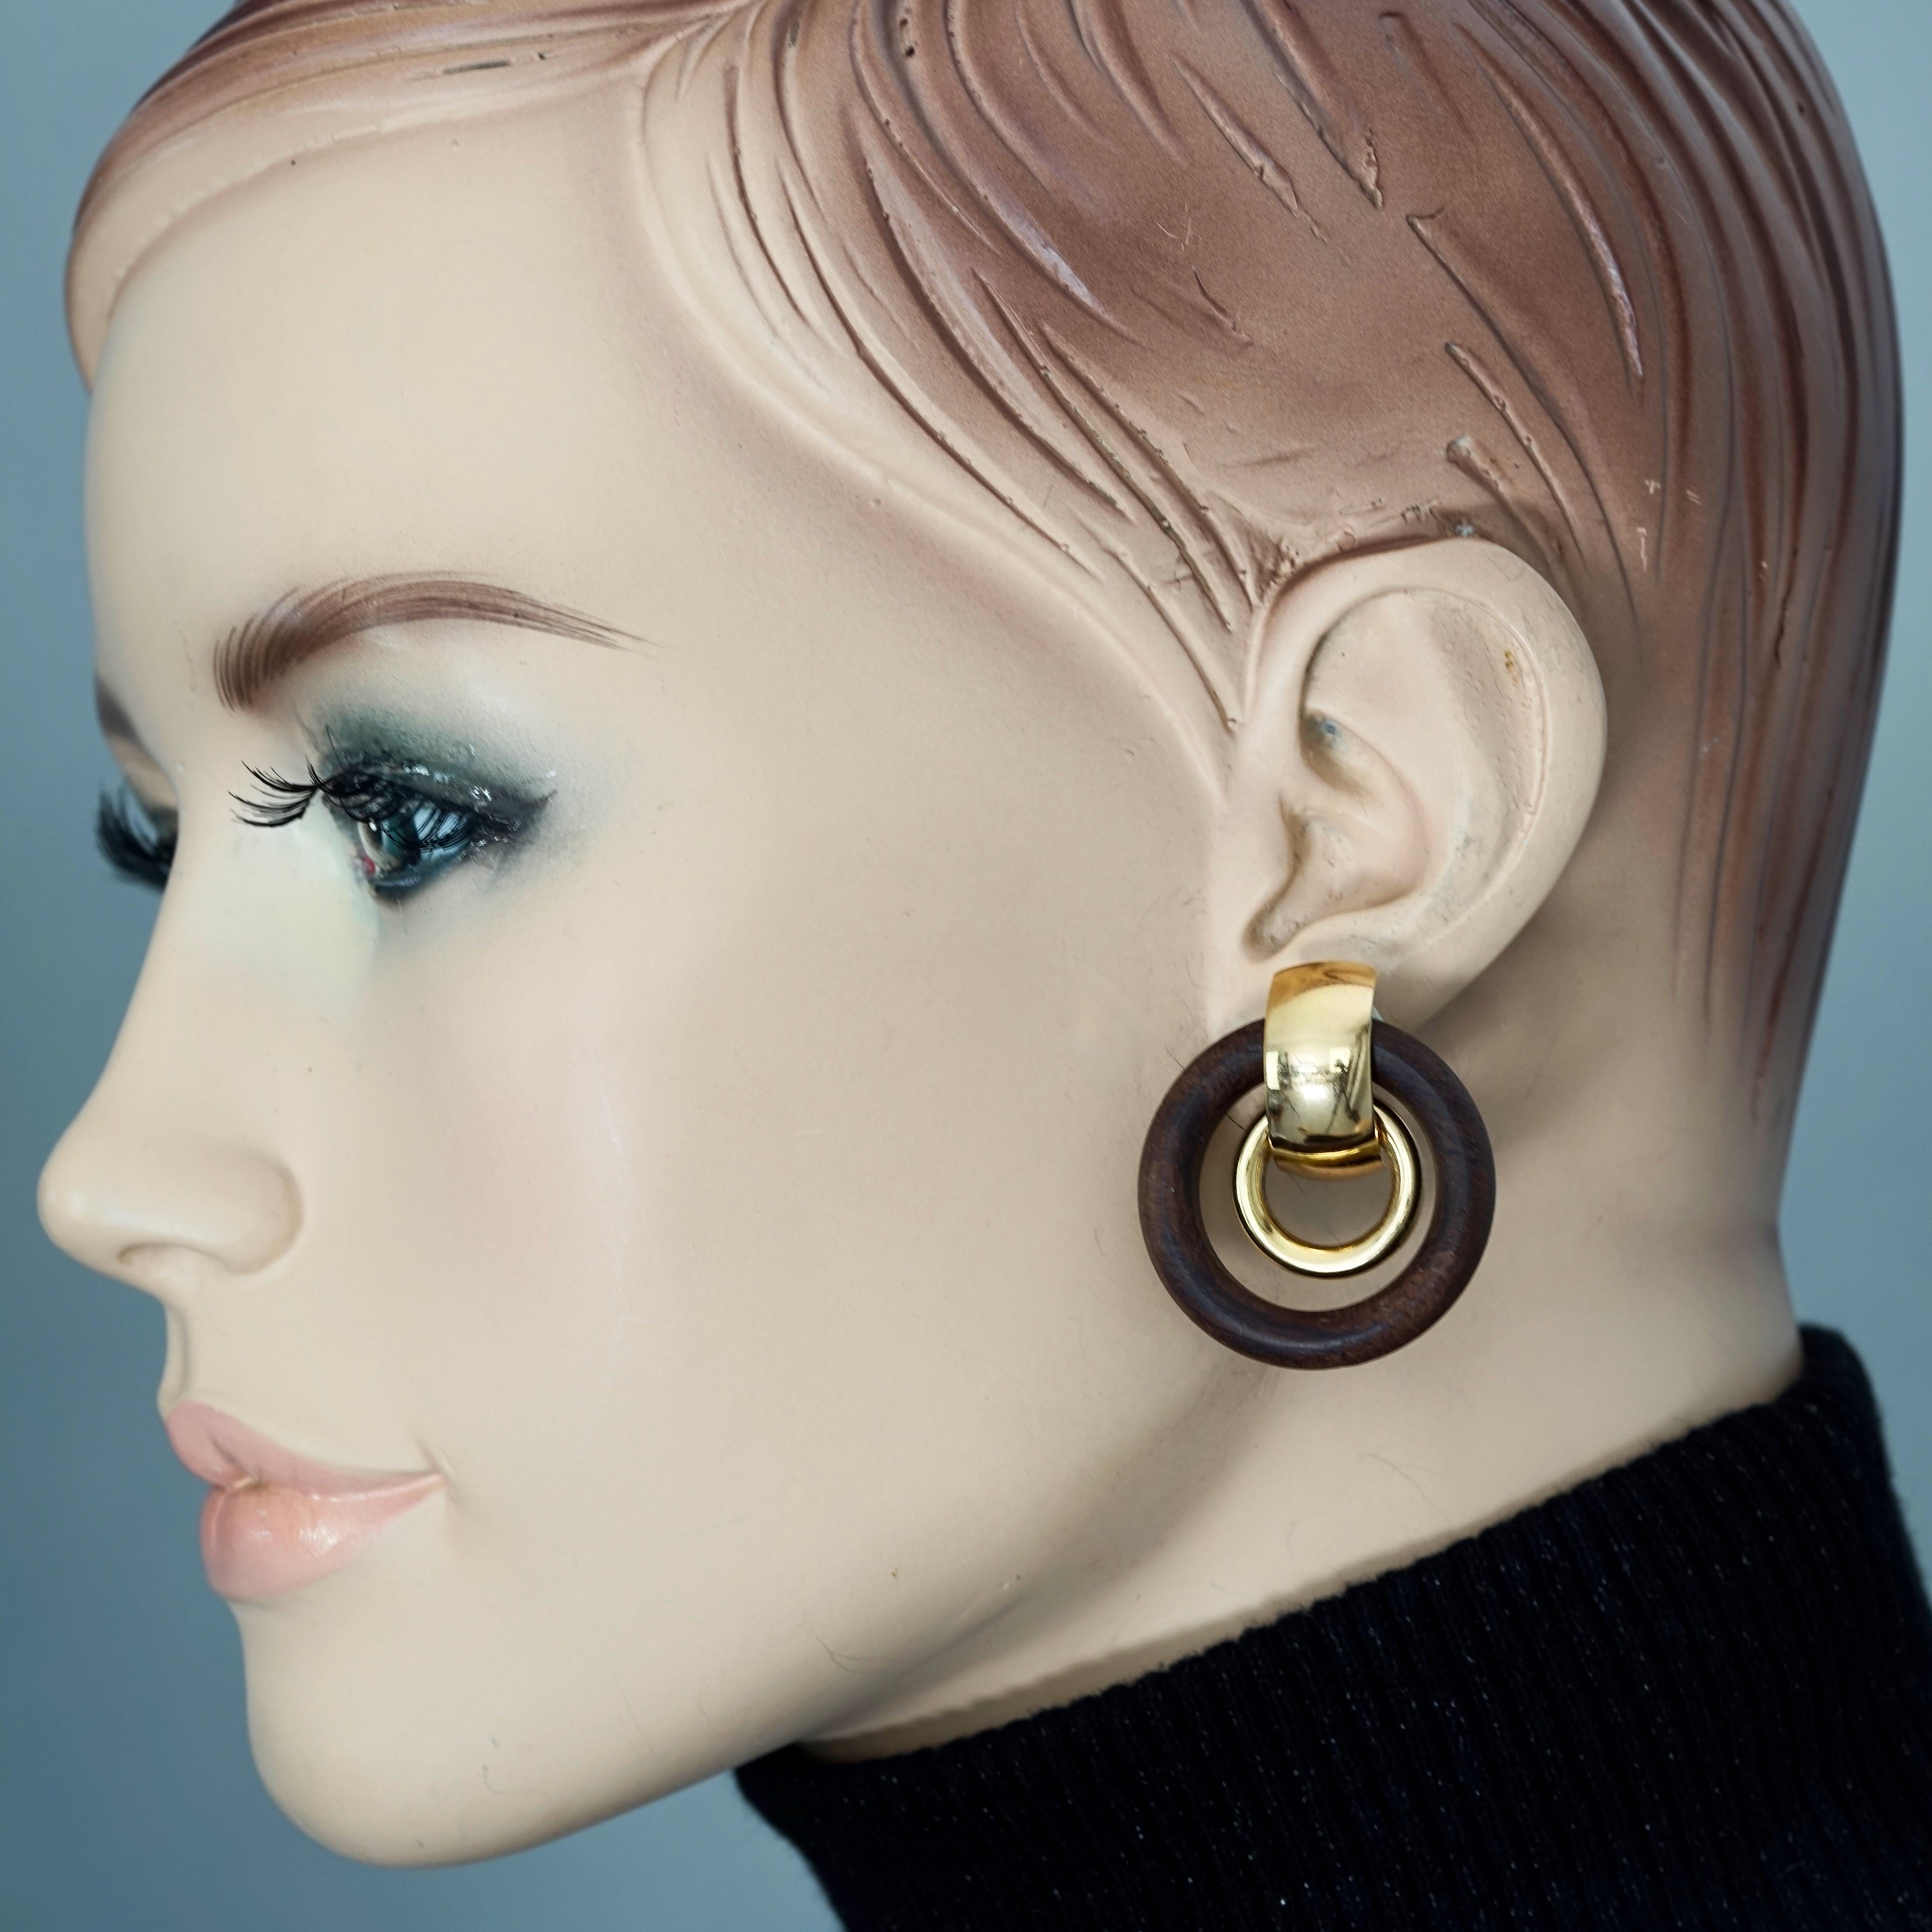 Vintage 1974 CHRISTIAN DIOR Wooden Gilt Double Hoop Earrings

Measurements:
Height: 1.42 inches (3.6 cm) 
Diameter: 1.26 inches (3.2 cm)
Weight per Earring: 8 grams

Features:
- 100% Authentic CHRISTIAN DIOR.
- Double hoop dangling earrings in wood